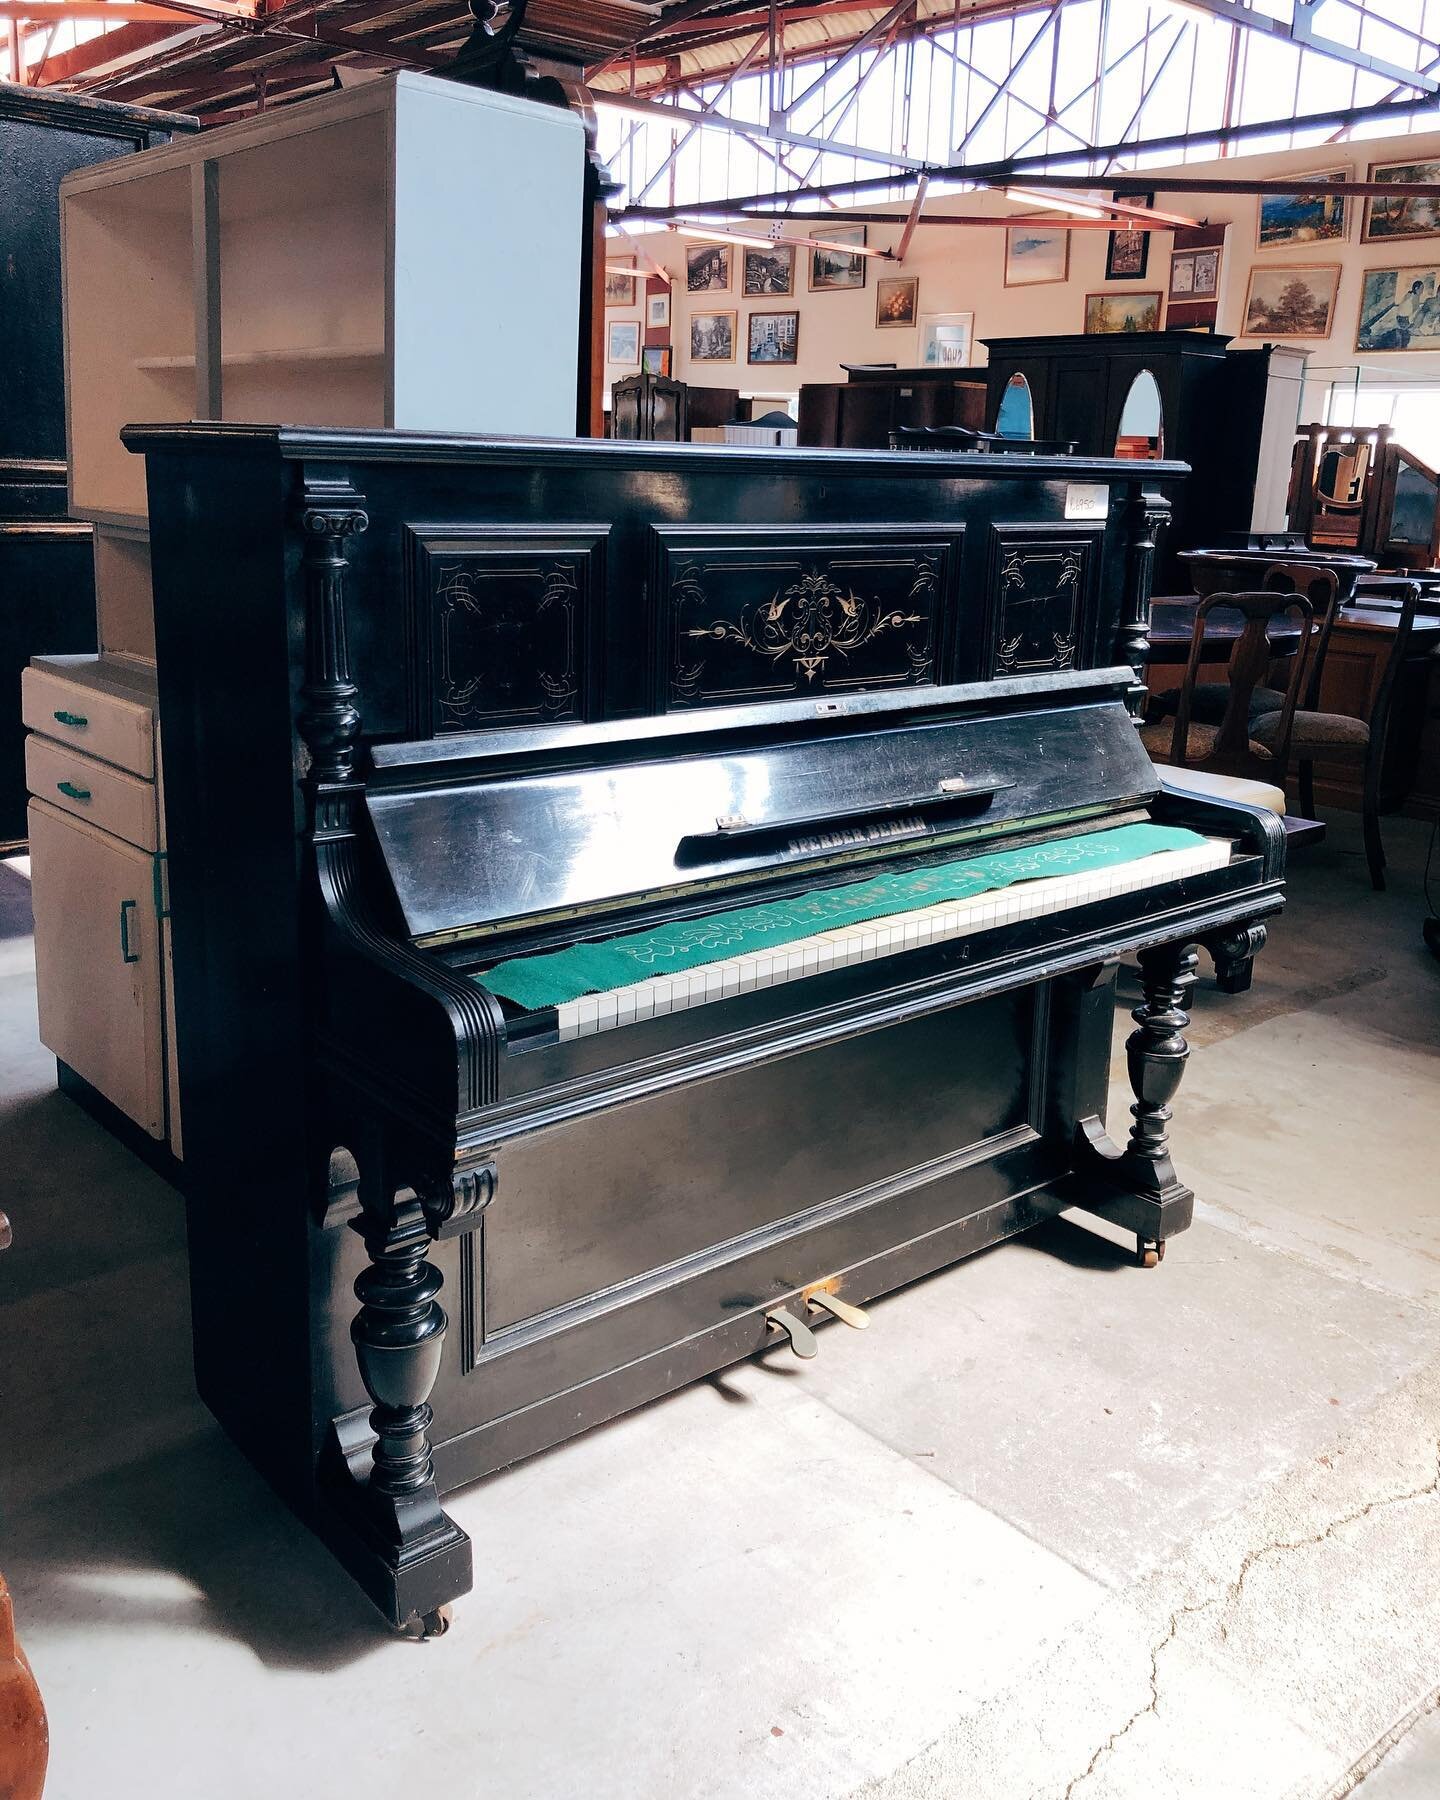 We often have instruments of all types availabe at the shop. Our favourites are the beautiful vintage pianos and organs that come through our doors &amp; find their special place in your homes.

We sometimes have more modern items too, like the keybo